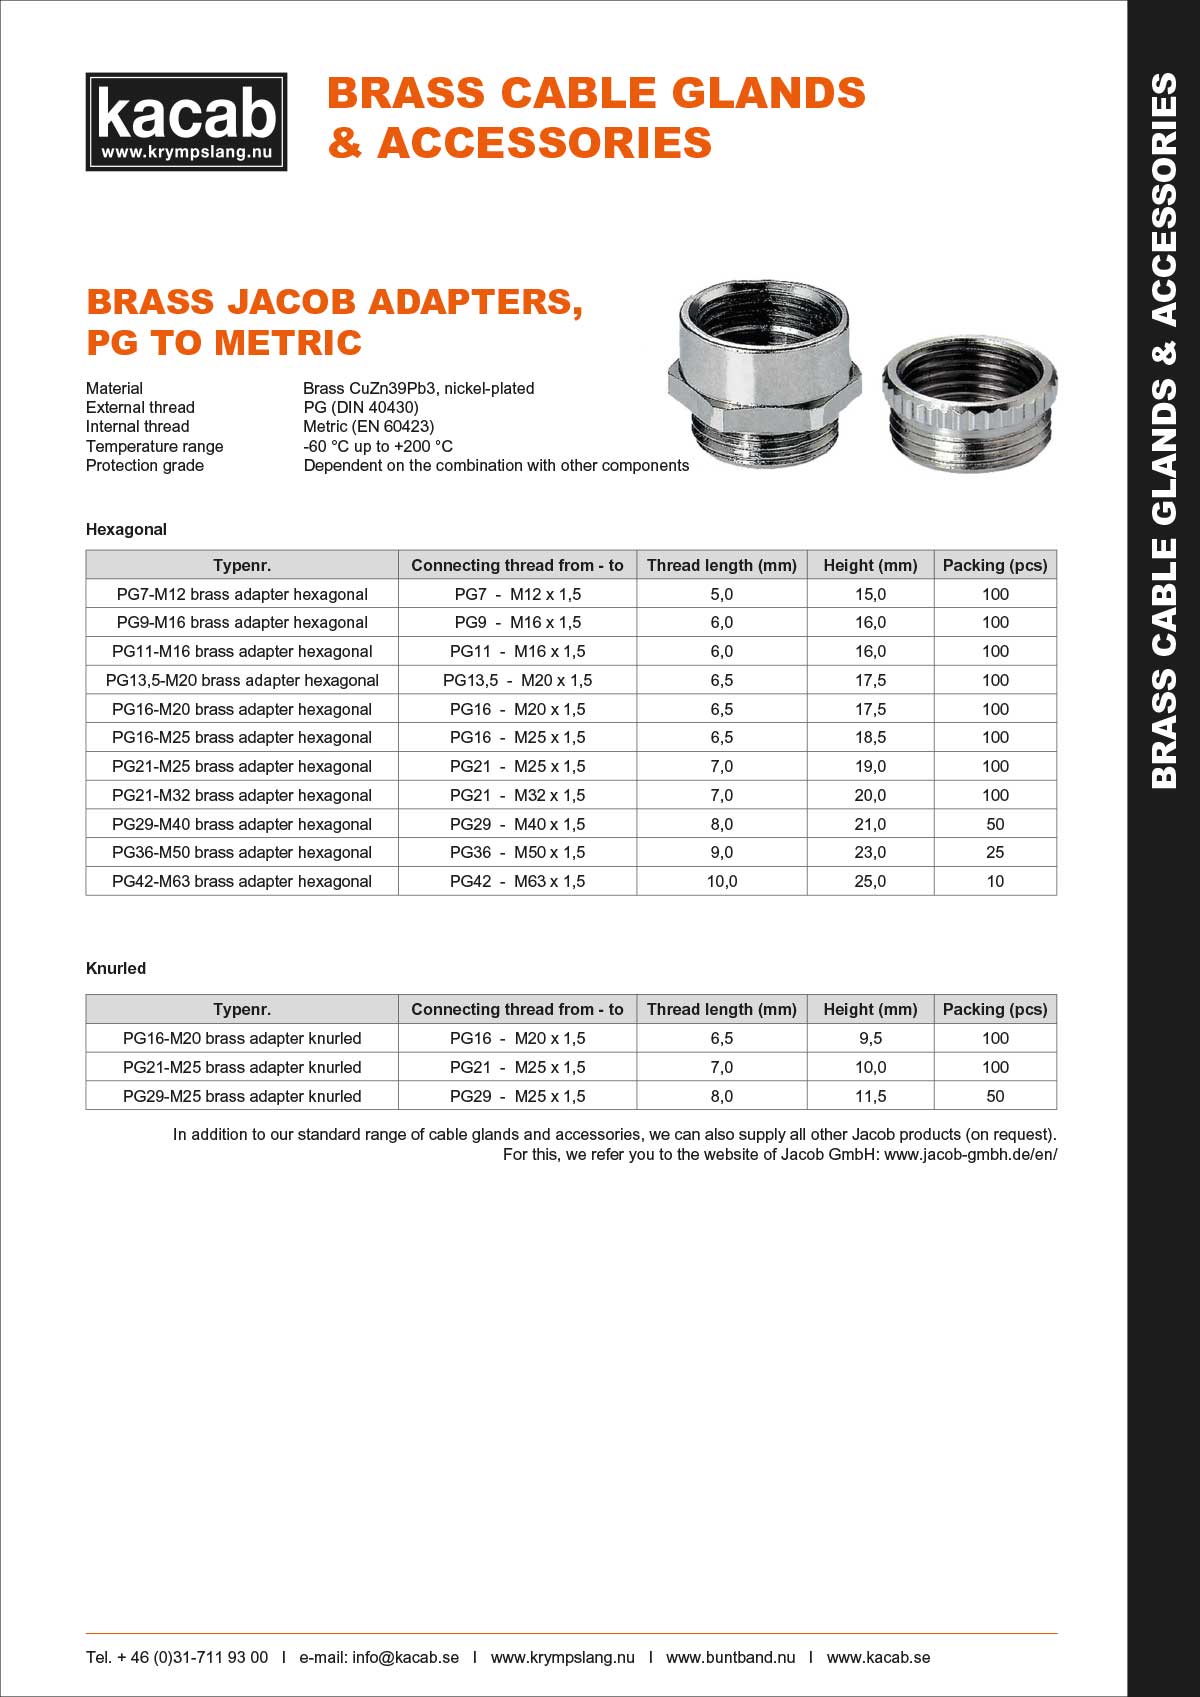 Brass Jacob adapters - PG to Metric